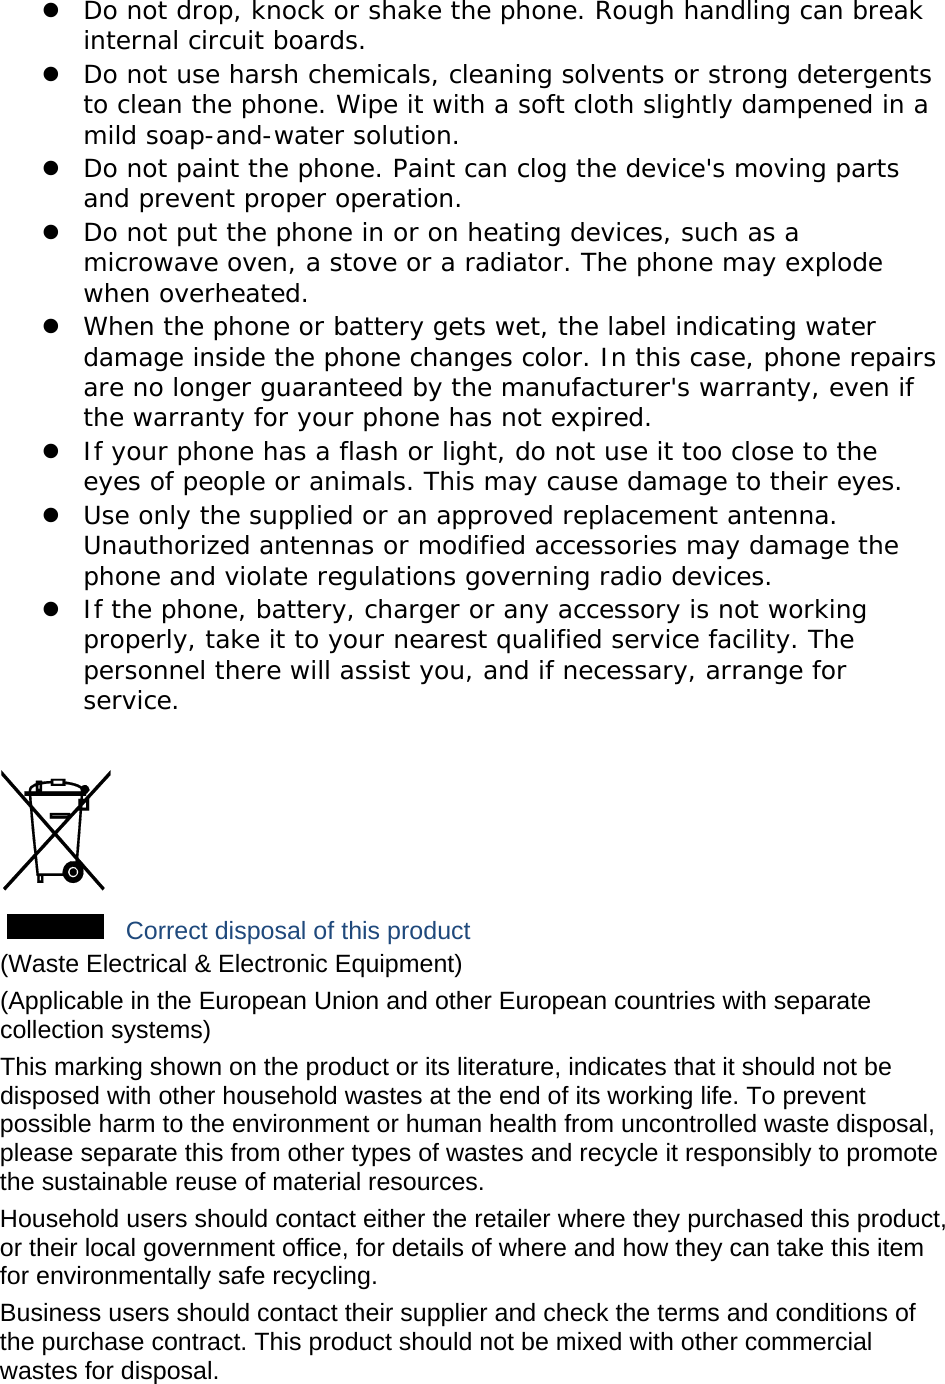  Do not drop, knock or shake the phone. Rough handling can break internal circuit boards.  Do not use harsh chemicals, cleaning solvents or strong detergents to clean the phone. Wipe it with a soft cloth slightly dampened in a mild soap-and-water solution.  Do not paint the phone. Paint can clog the device&apos;s moving parts and prevent proper operation.  Do not put the phone in or on heating devices, such as a microwave oven, a stove or a radiator. The phone may explode when overheated.  When the phone or battery gets wet, the label indicating water damage inside the phone changes color. In this case, phone repairs are no longer guaranteed by the manufacturer&apos;s warranty, even if the warranty for your phone has not expired.   If your phone has a flash or light, do not use it too close to the eyes of people or animals. This may cause damage to their eyes.  Use only the supplied or an approved replacement antenna. Unauthorized antennas or modified accessories may damage the phone and violate regulations governing radio devices.  If the phone, battery, charger or any accessory is not working properly, take it to your nearest qualified service facility. The personnel there will assist you, and if necessary, arrange for service.   Correct disposal of this product (Waste Electrical &amp; Electronic Equipment) (Applicable in the European Union and other European countries with separate collection systems) This marking shown on the product or its literature, indicates that it should not be disposed with other household wastes at the end of its working life. To prevent possible harm to the environment or human health from uncontrolled waste disposal, please separate this from other types of wastes and recycle it responsibly to promote the sustainable reuse of material resources. Household users should contact either the retailer where they purchased this product, or their local government office, for details of where and how they can take this item for environmentally safe recycling. Business users should contact their supplier and check the terms and conditions of the purchase contract. This product should not be mixed with other commercial wastes for disposal. 